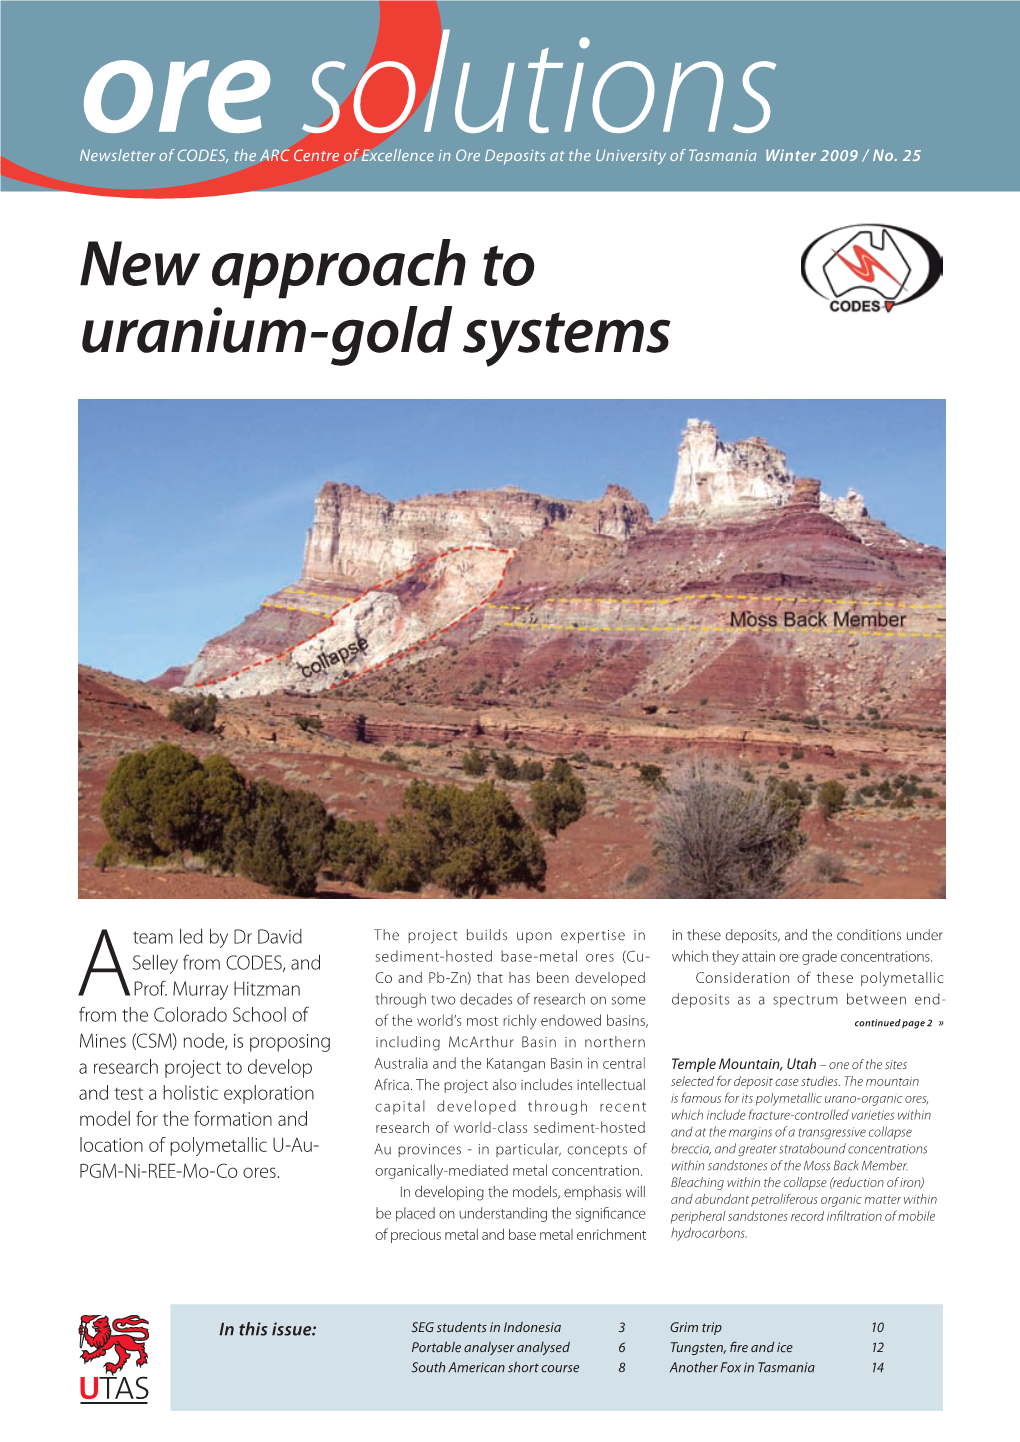 New Approach to Uranium-Gold Systems